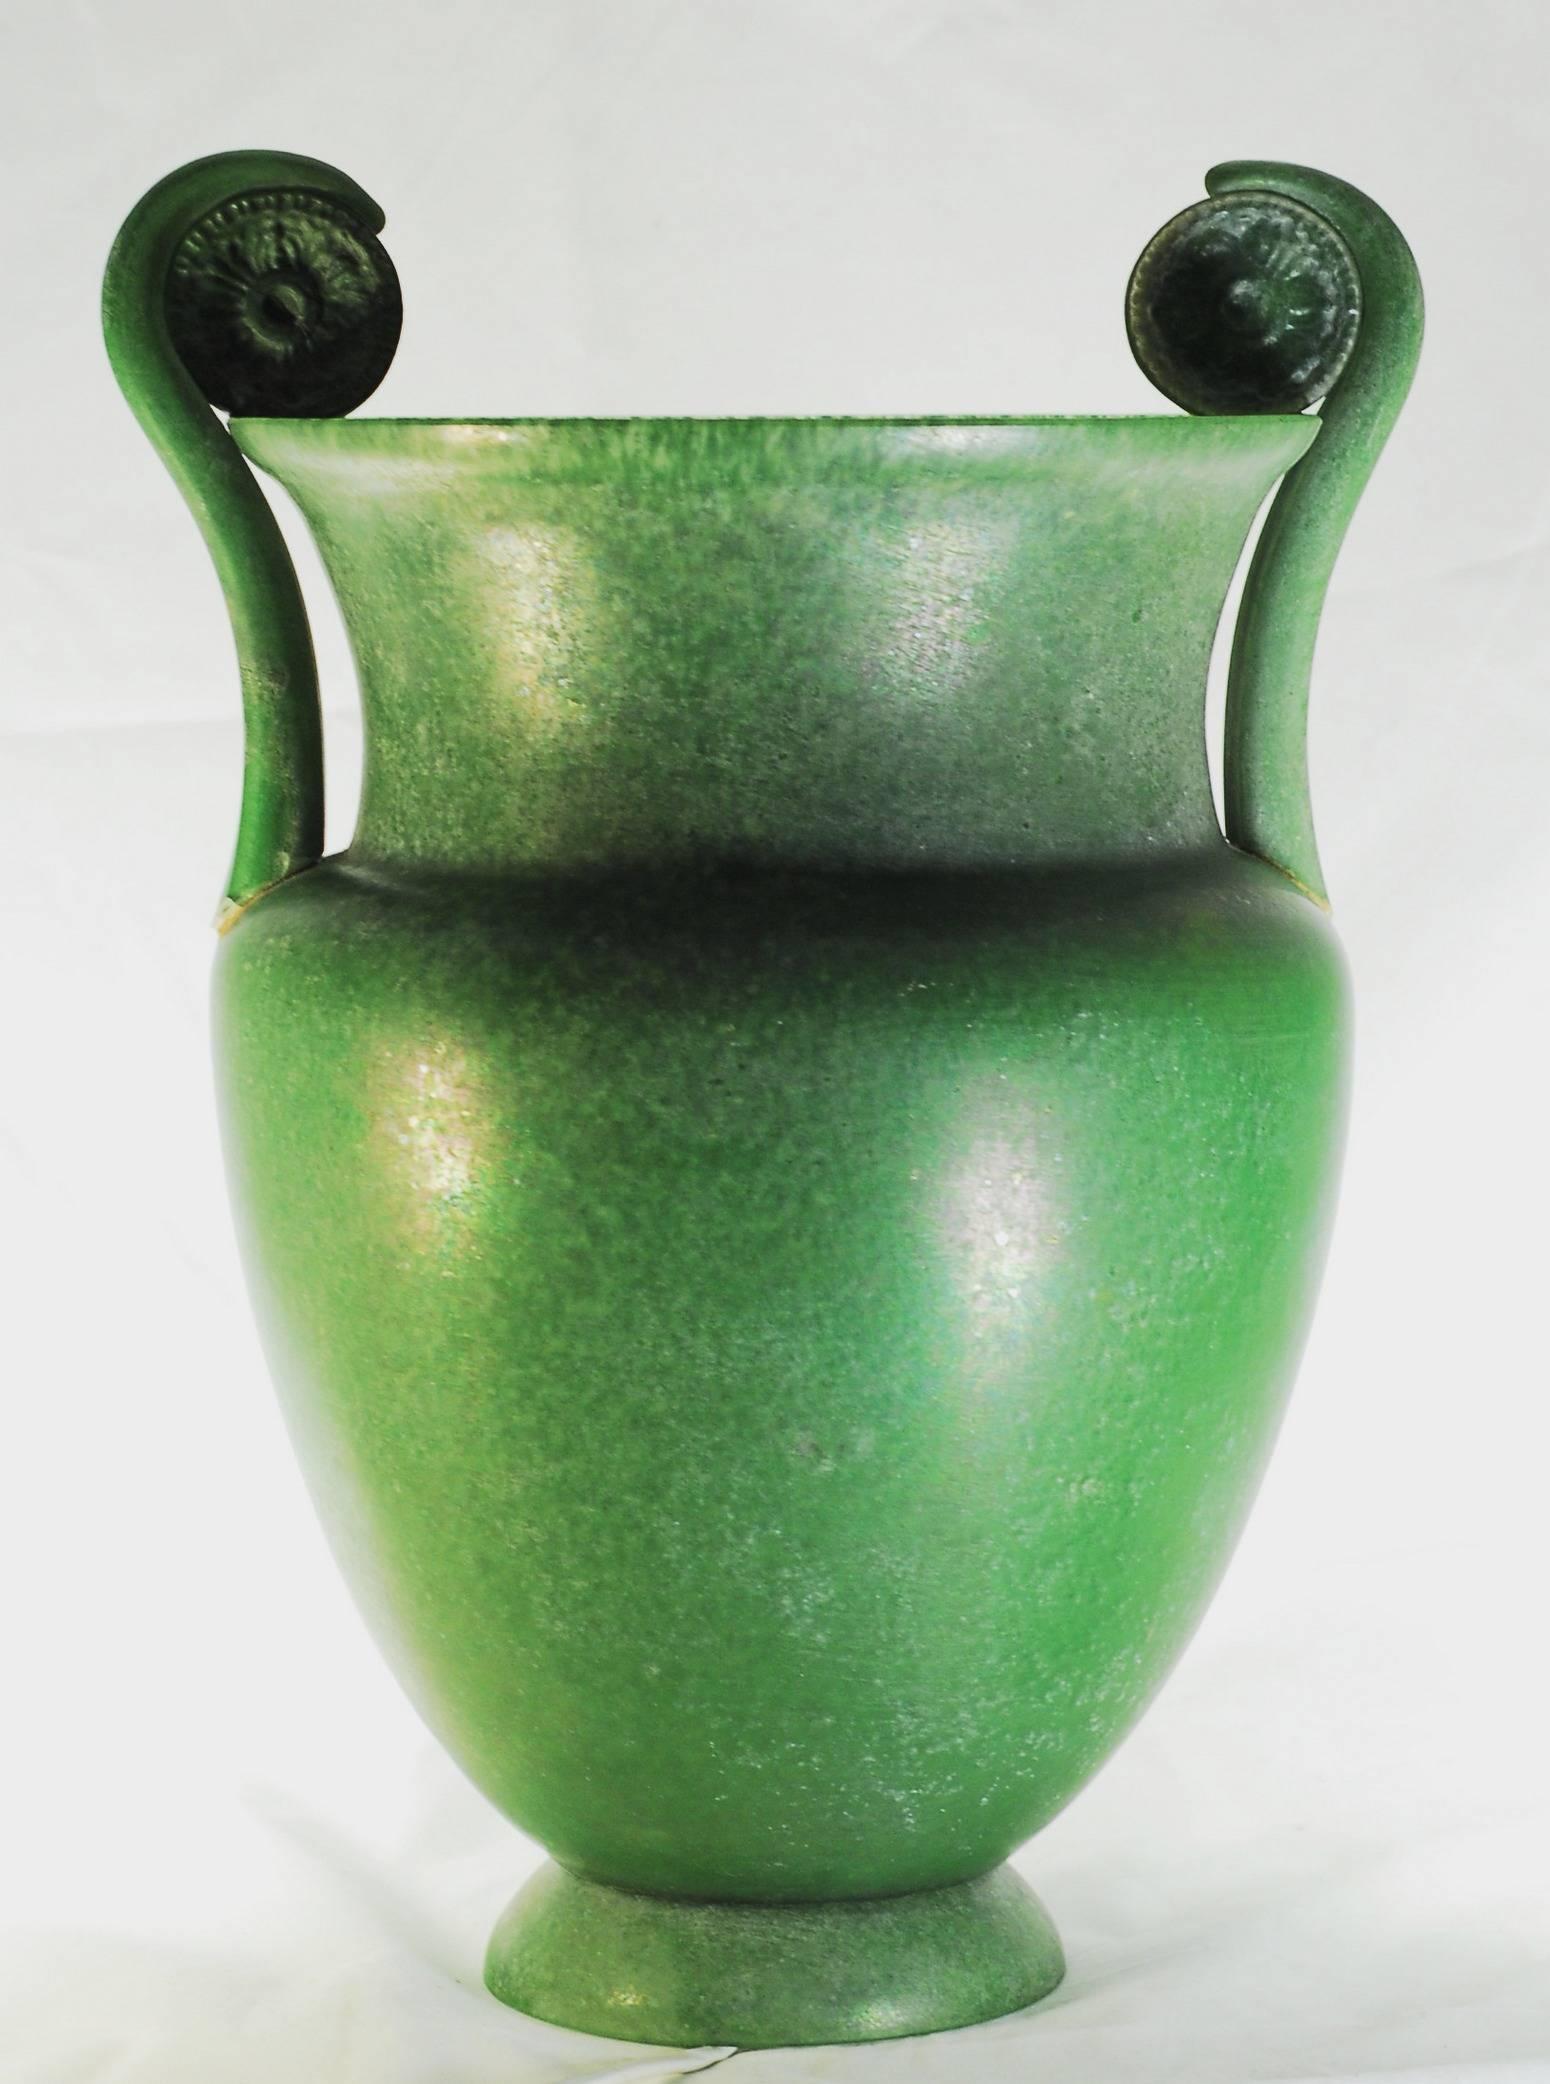 Monumental glass crater vase reproduction by Sergio Rossi, late 1980s. Scavo and green. Torchere.

This is the tall vase part of the Athena group, made as a table torchere. The green coloration is made with “mace”, rolling the melted glass over